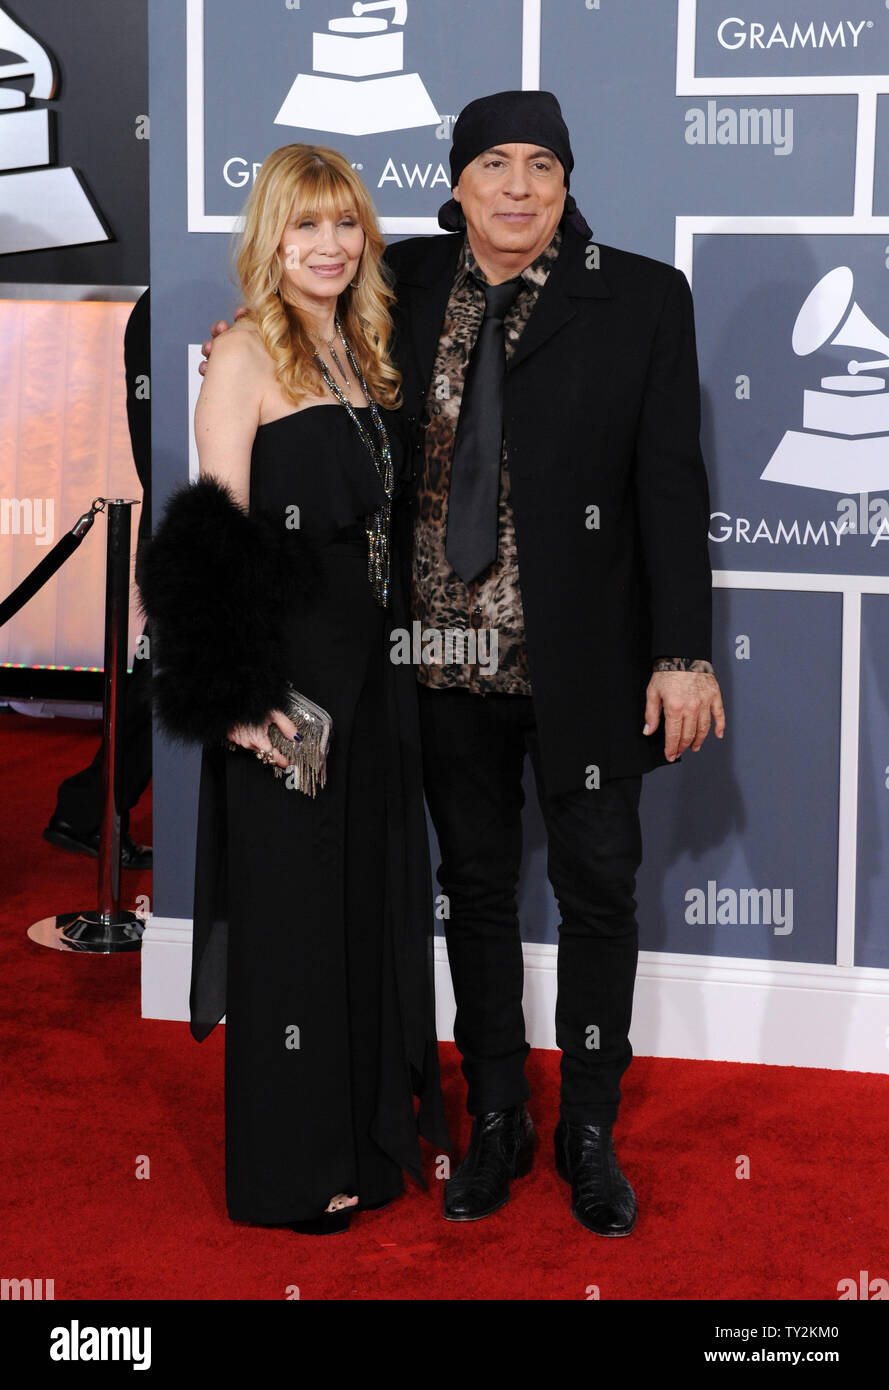 Musician Steven Van Zandt and his wife Maureen Van Zandt arrive at the 54th annual Grammy Awards at Staples Center in Los Angeles on February 12, 2012. UPI/Jim Ruymen Stock Photo